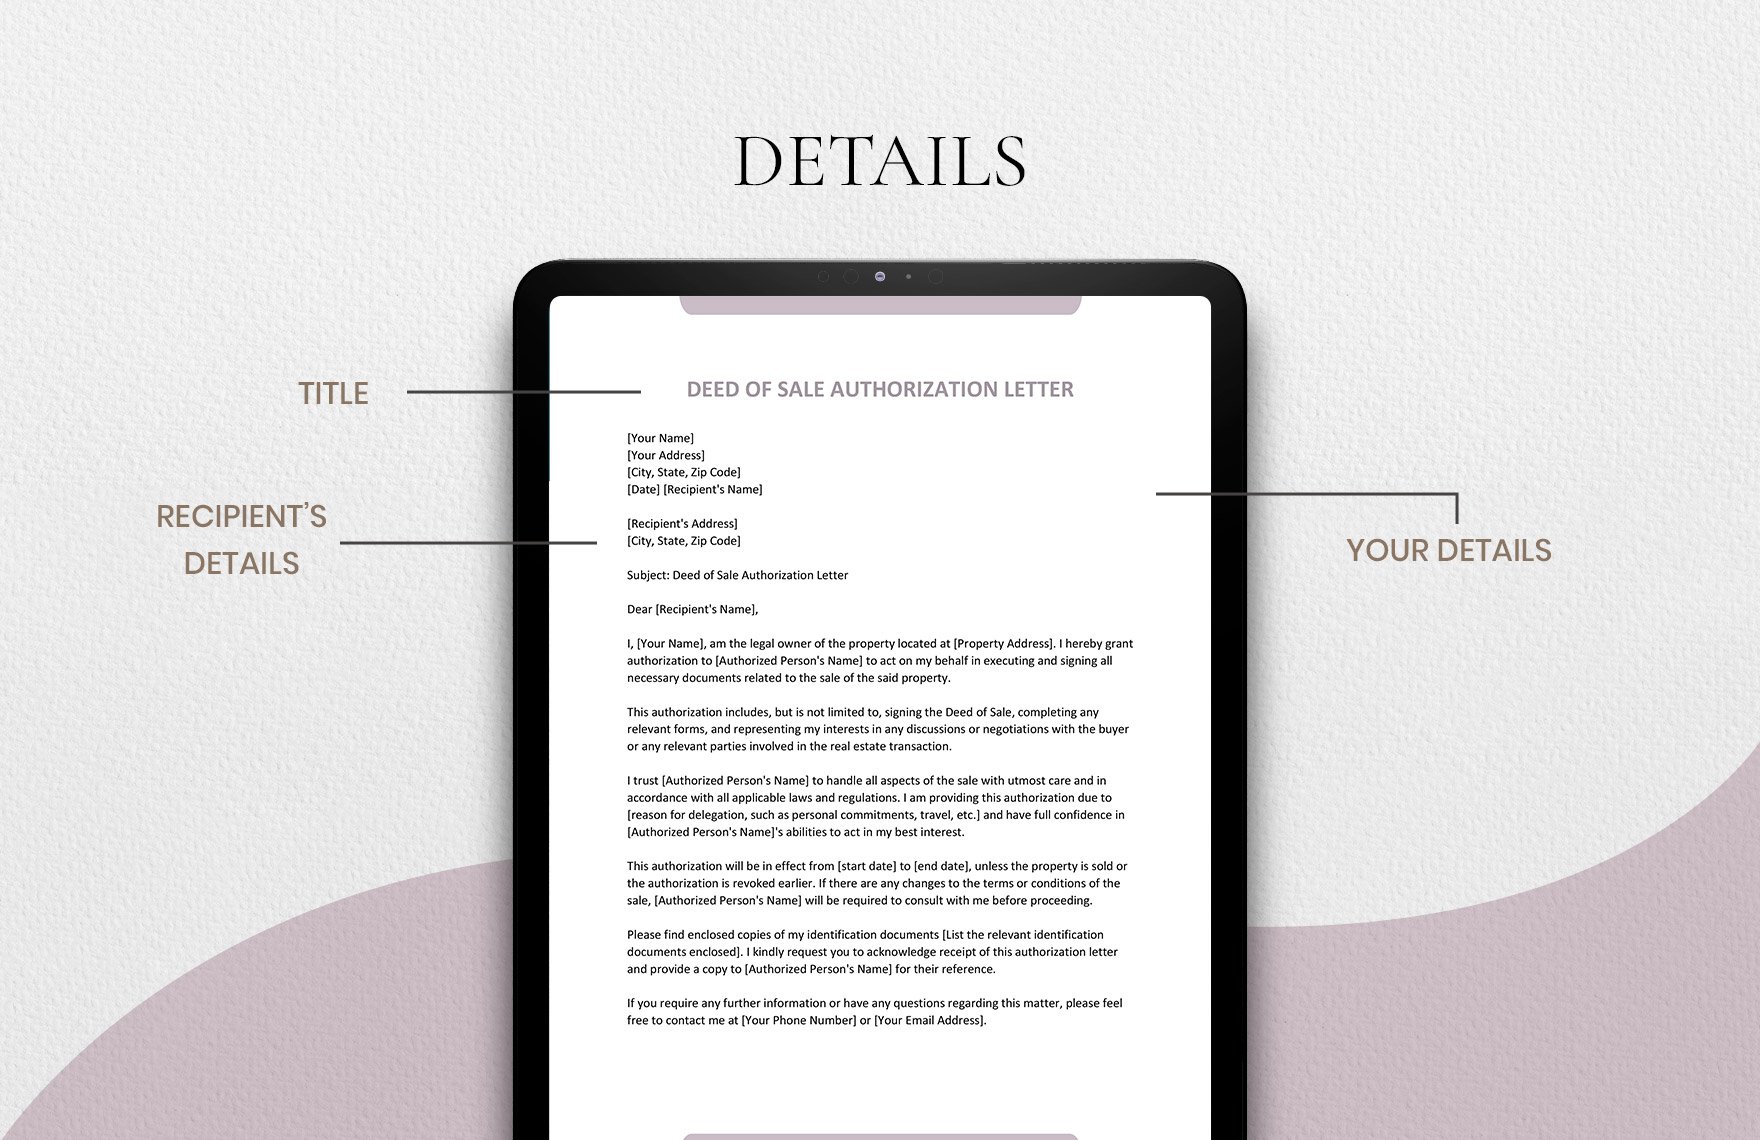 Deed of Sale Authorization Letter